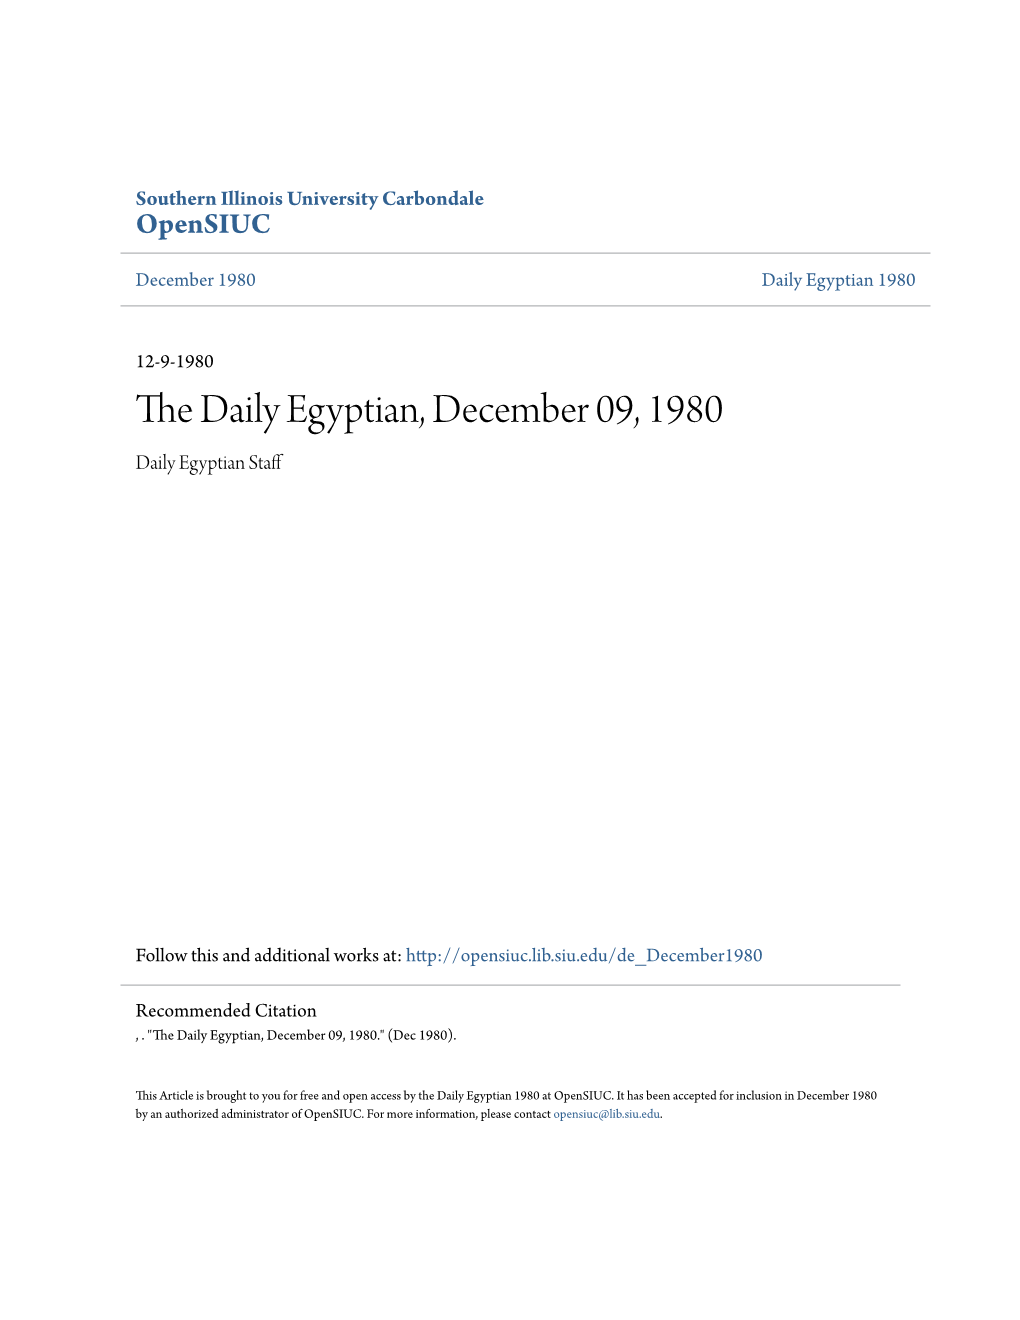 The Daily Egyptian, December 09, 1980